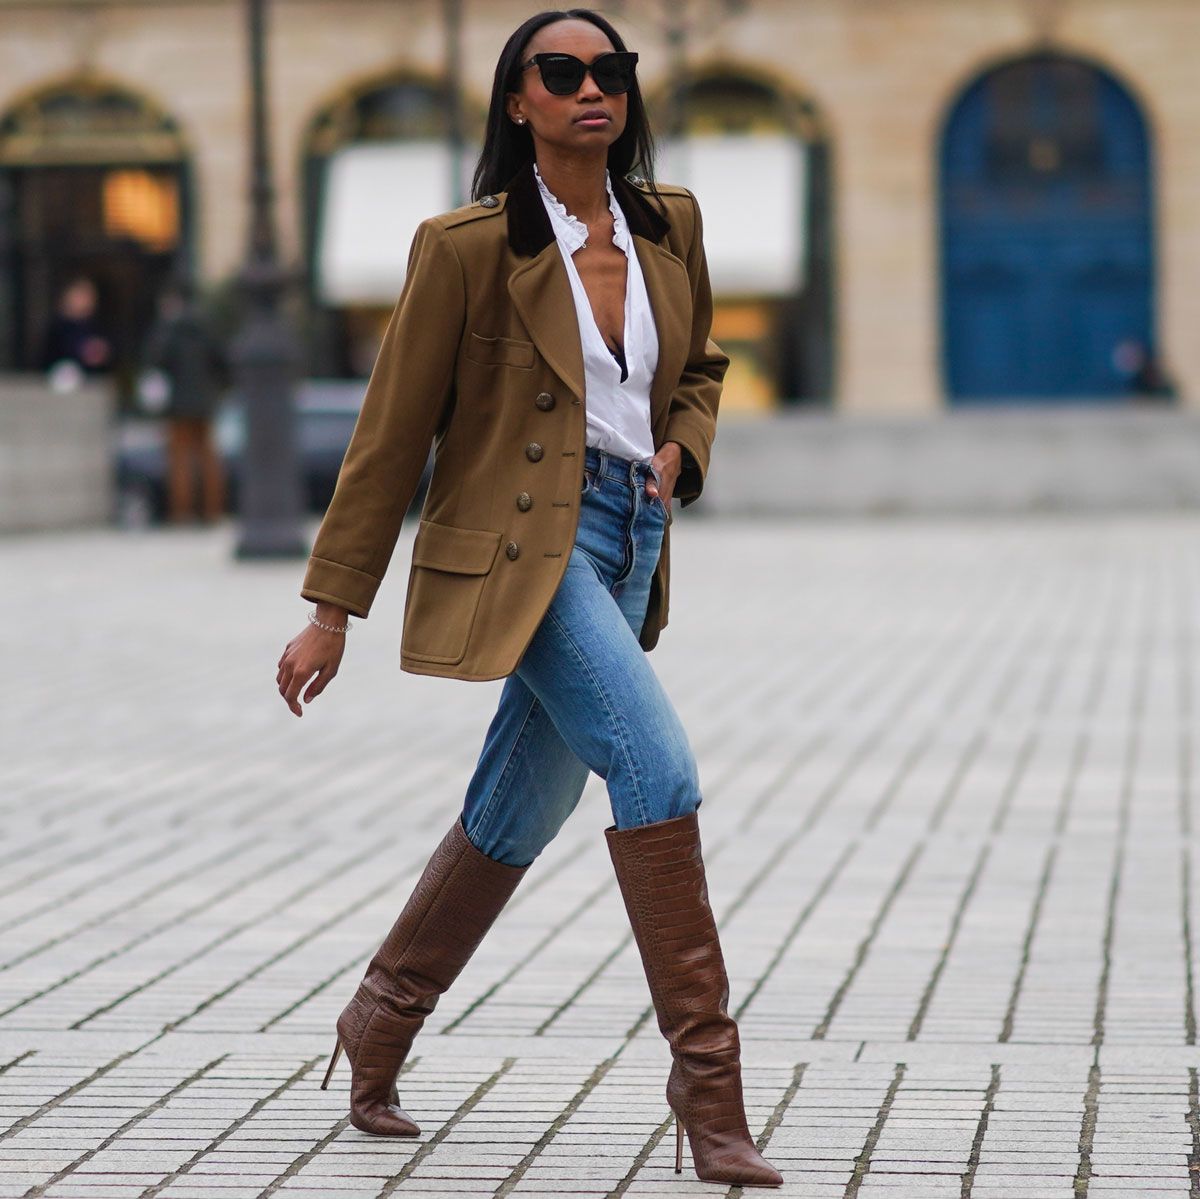 HOW TO STYLE KNEE HIGH BOOTS OUTFIT IDEAS